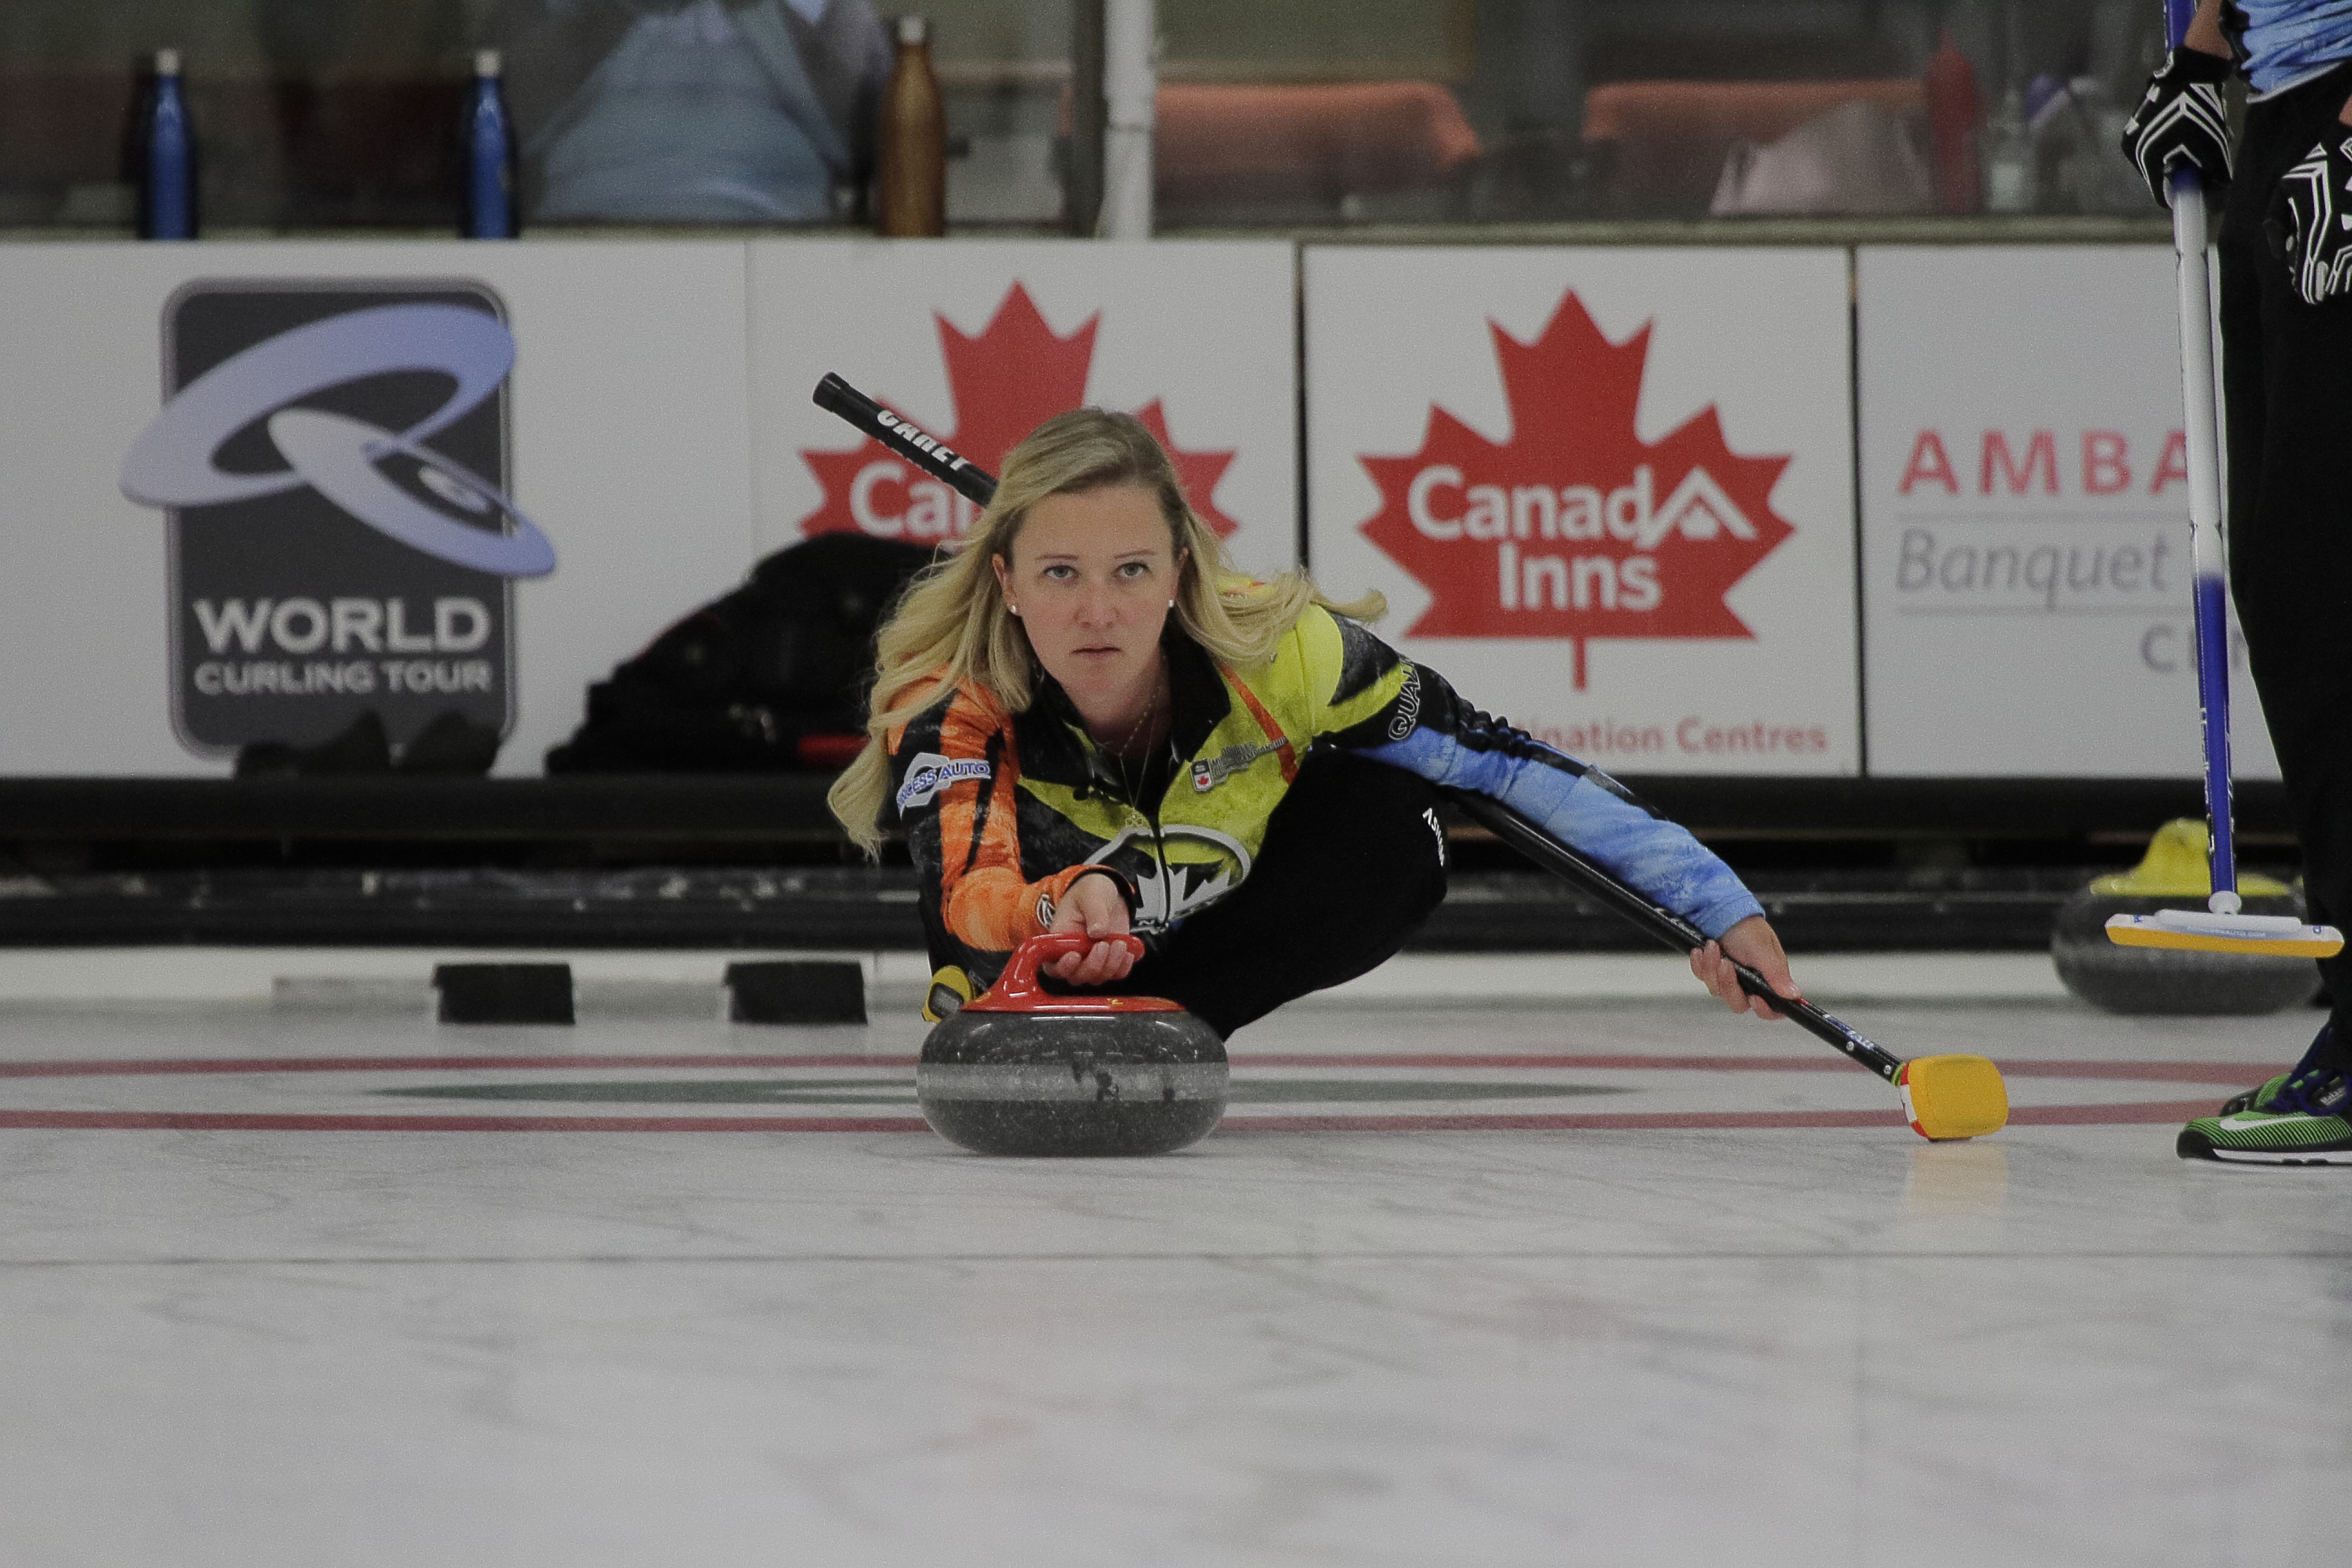 CurlingZone Canad Inns Canadian Mixed Doubles Trials Teams Announced